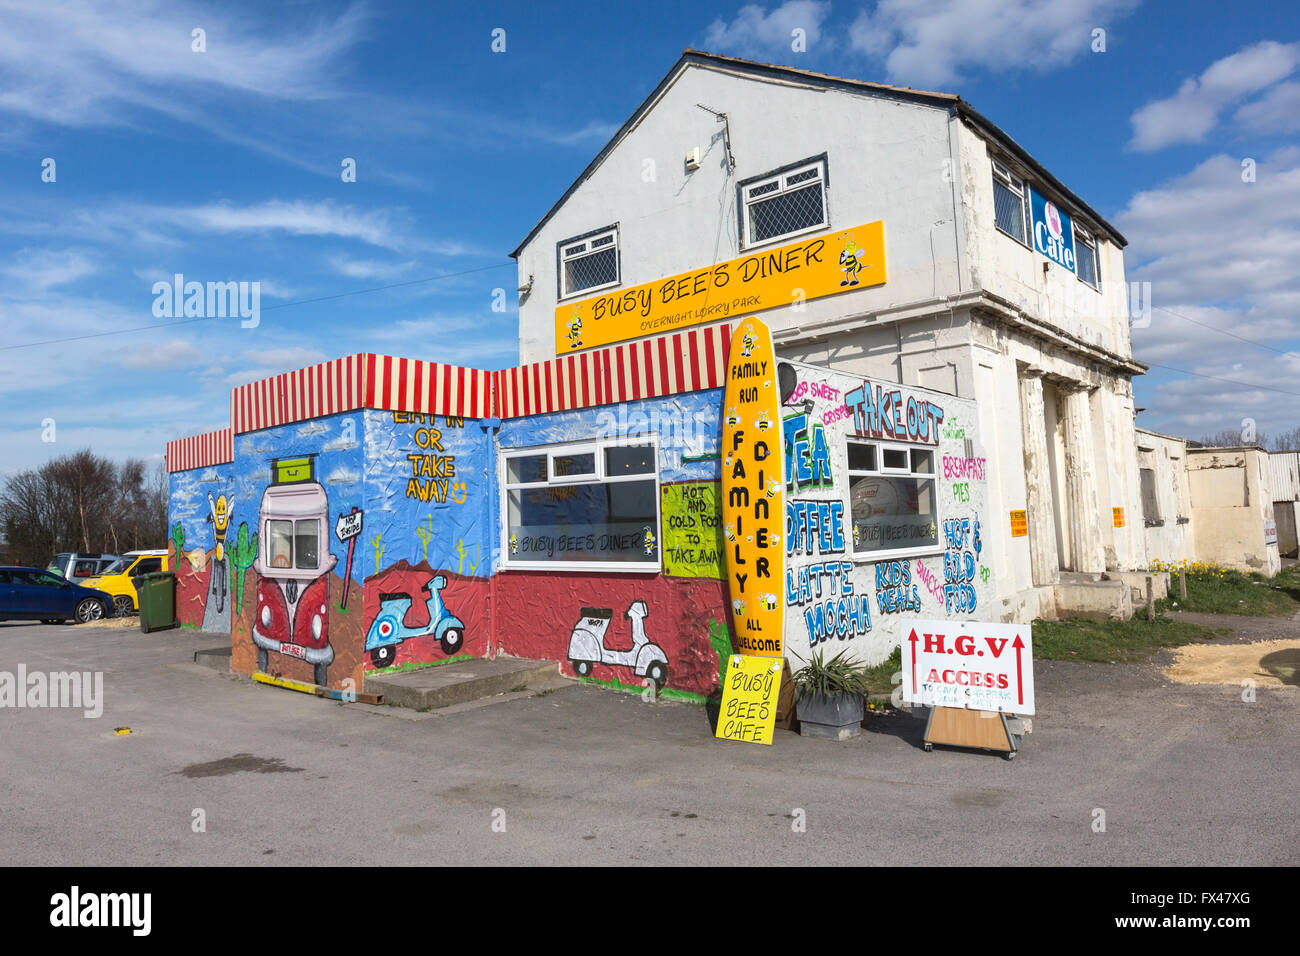 Busy Bees Diner with the exterior of the building painted in a street art surf shack type,  A1 South, Darrington, Stock Photo